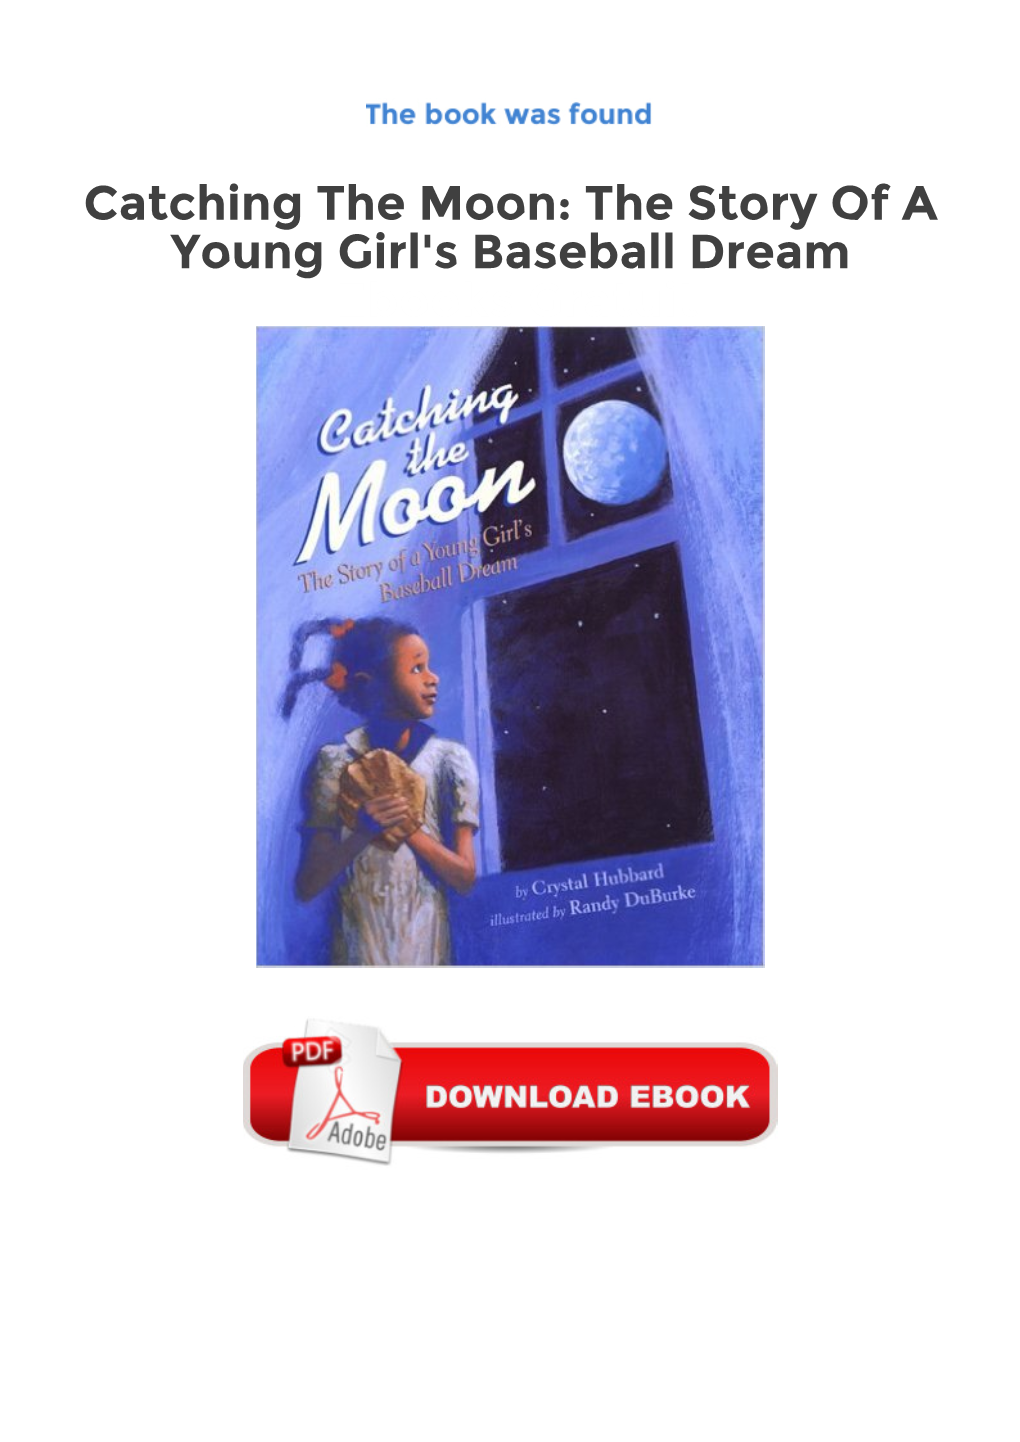 Catching the Moon: the Story of a Young Girl's Baseball Dream